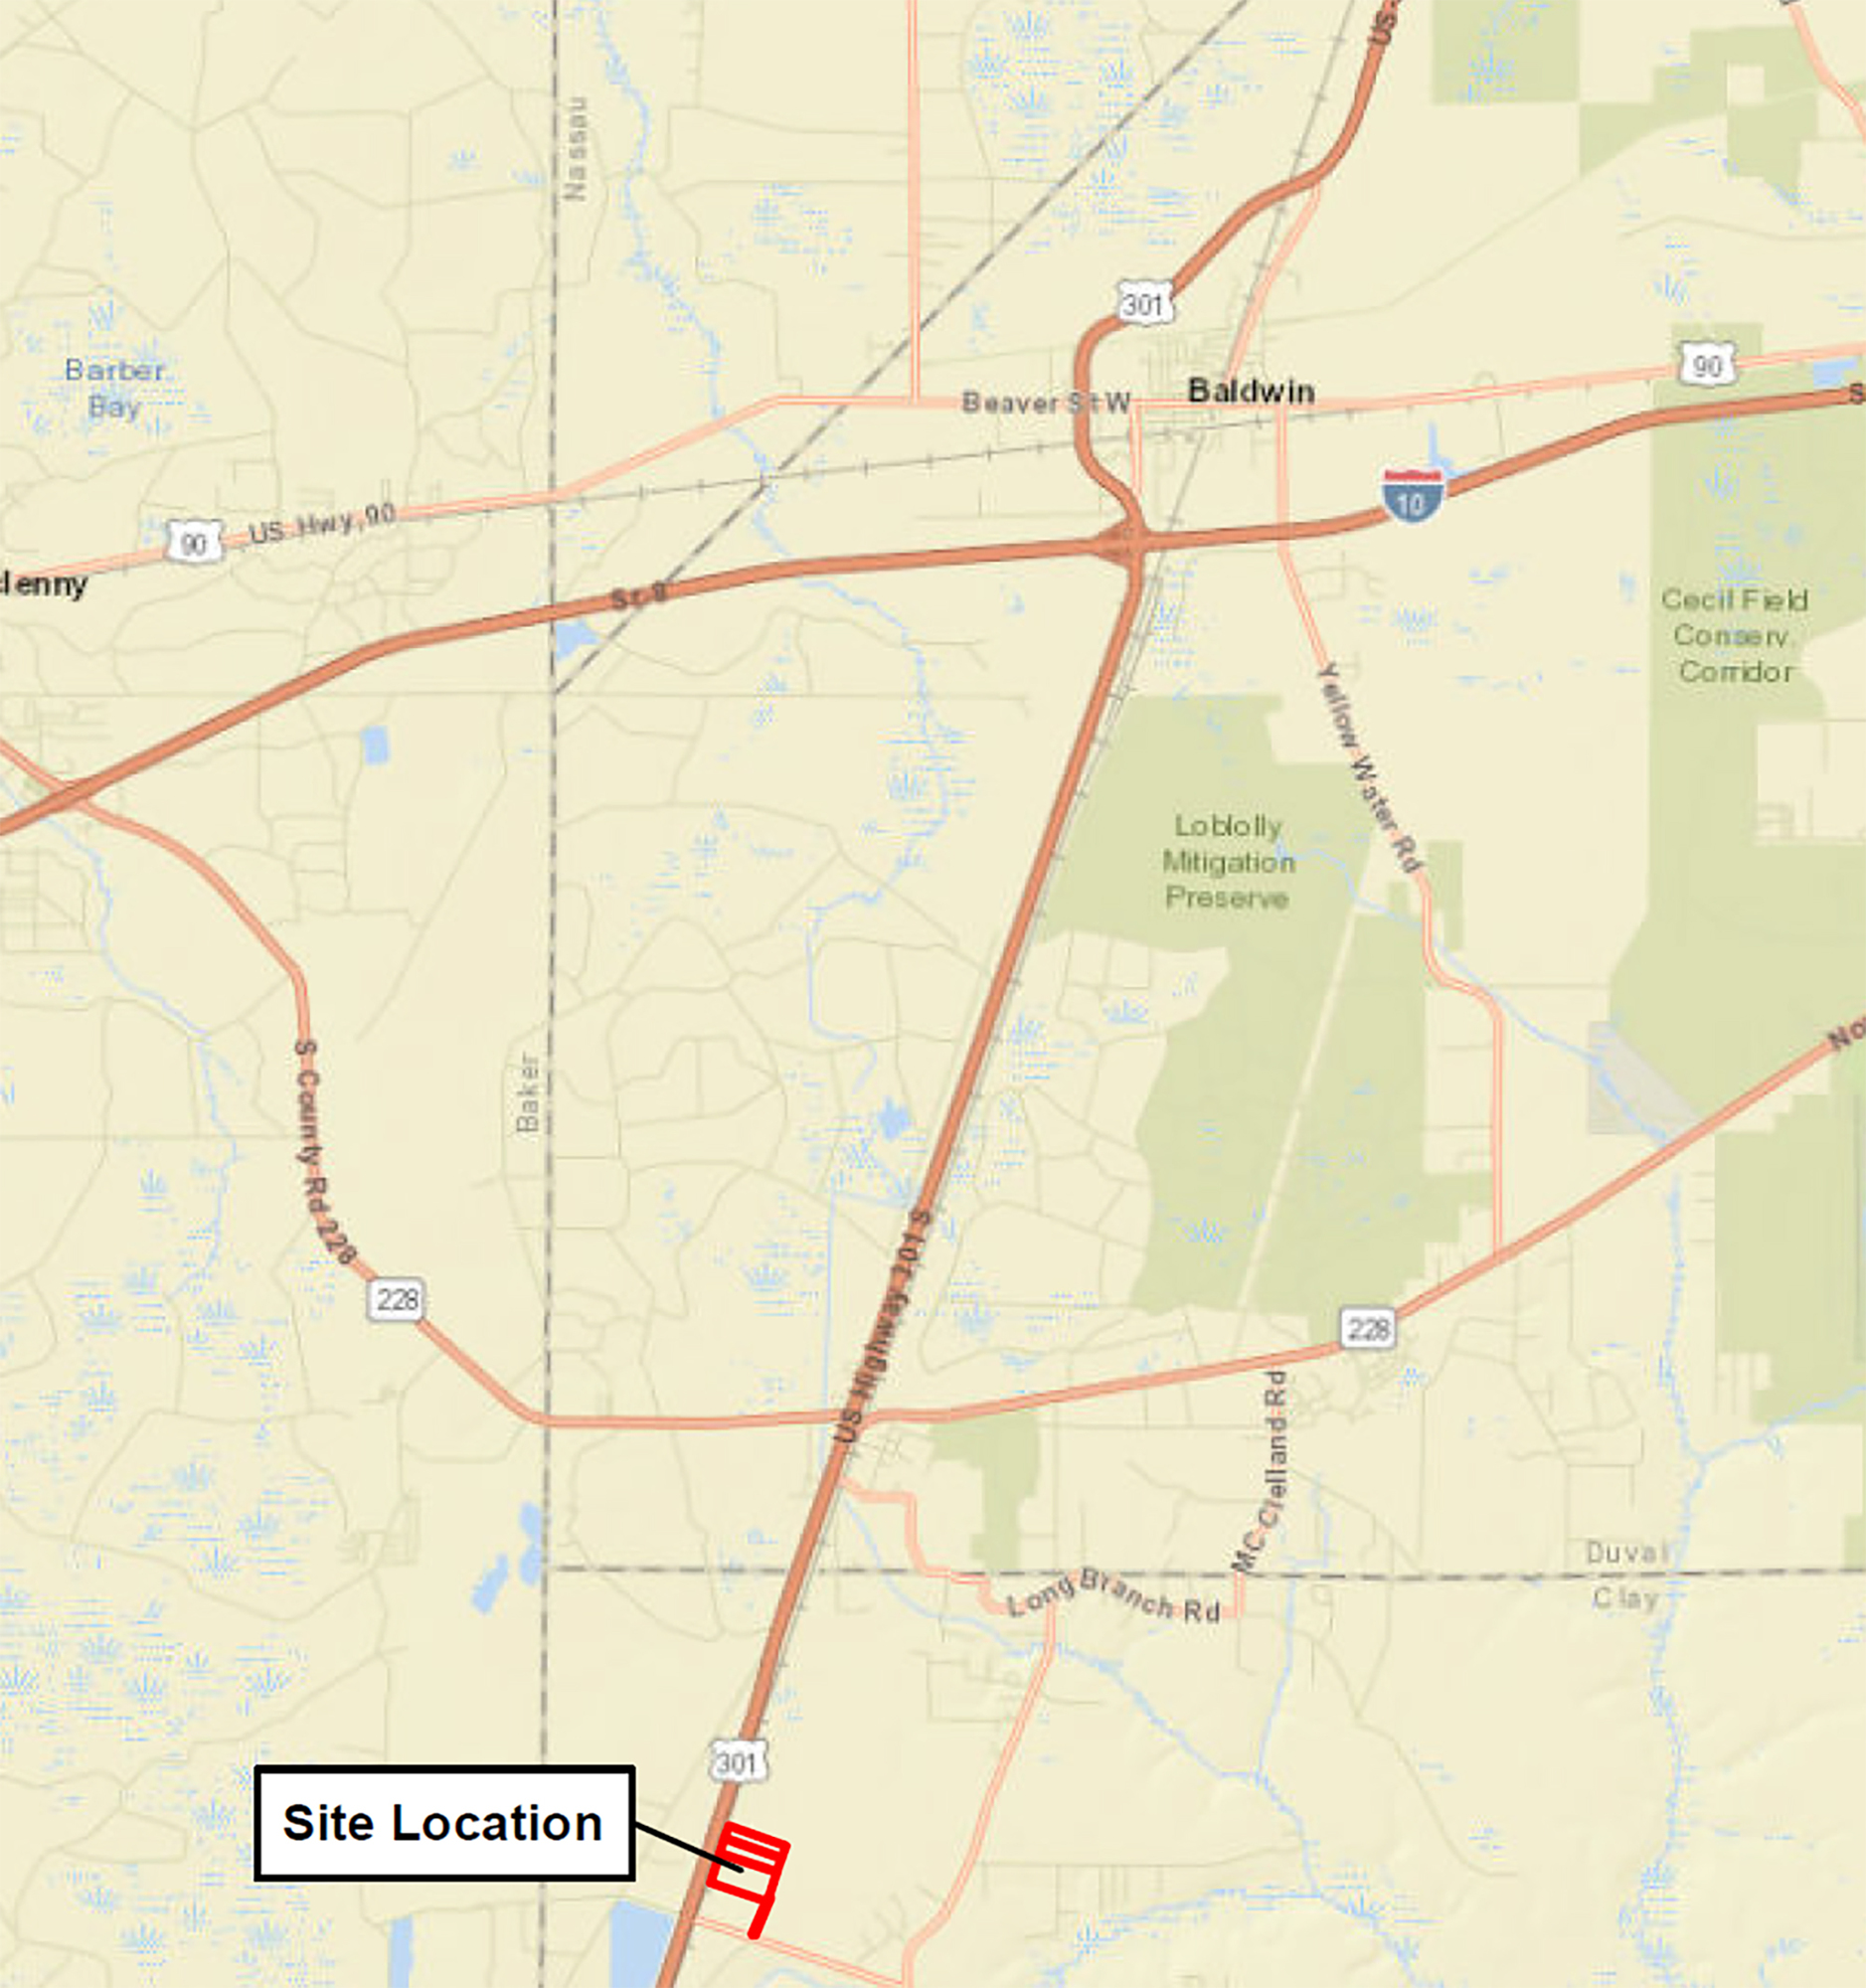 The project site is east along U.S. 301, at County Road 218 about 10 miles south of Interstate 10.